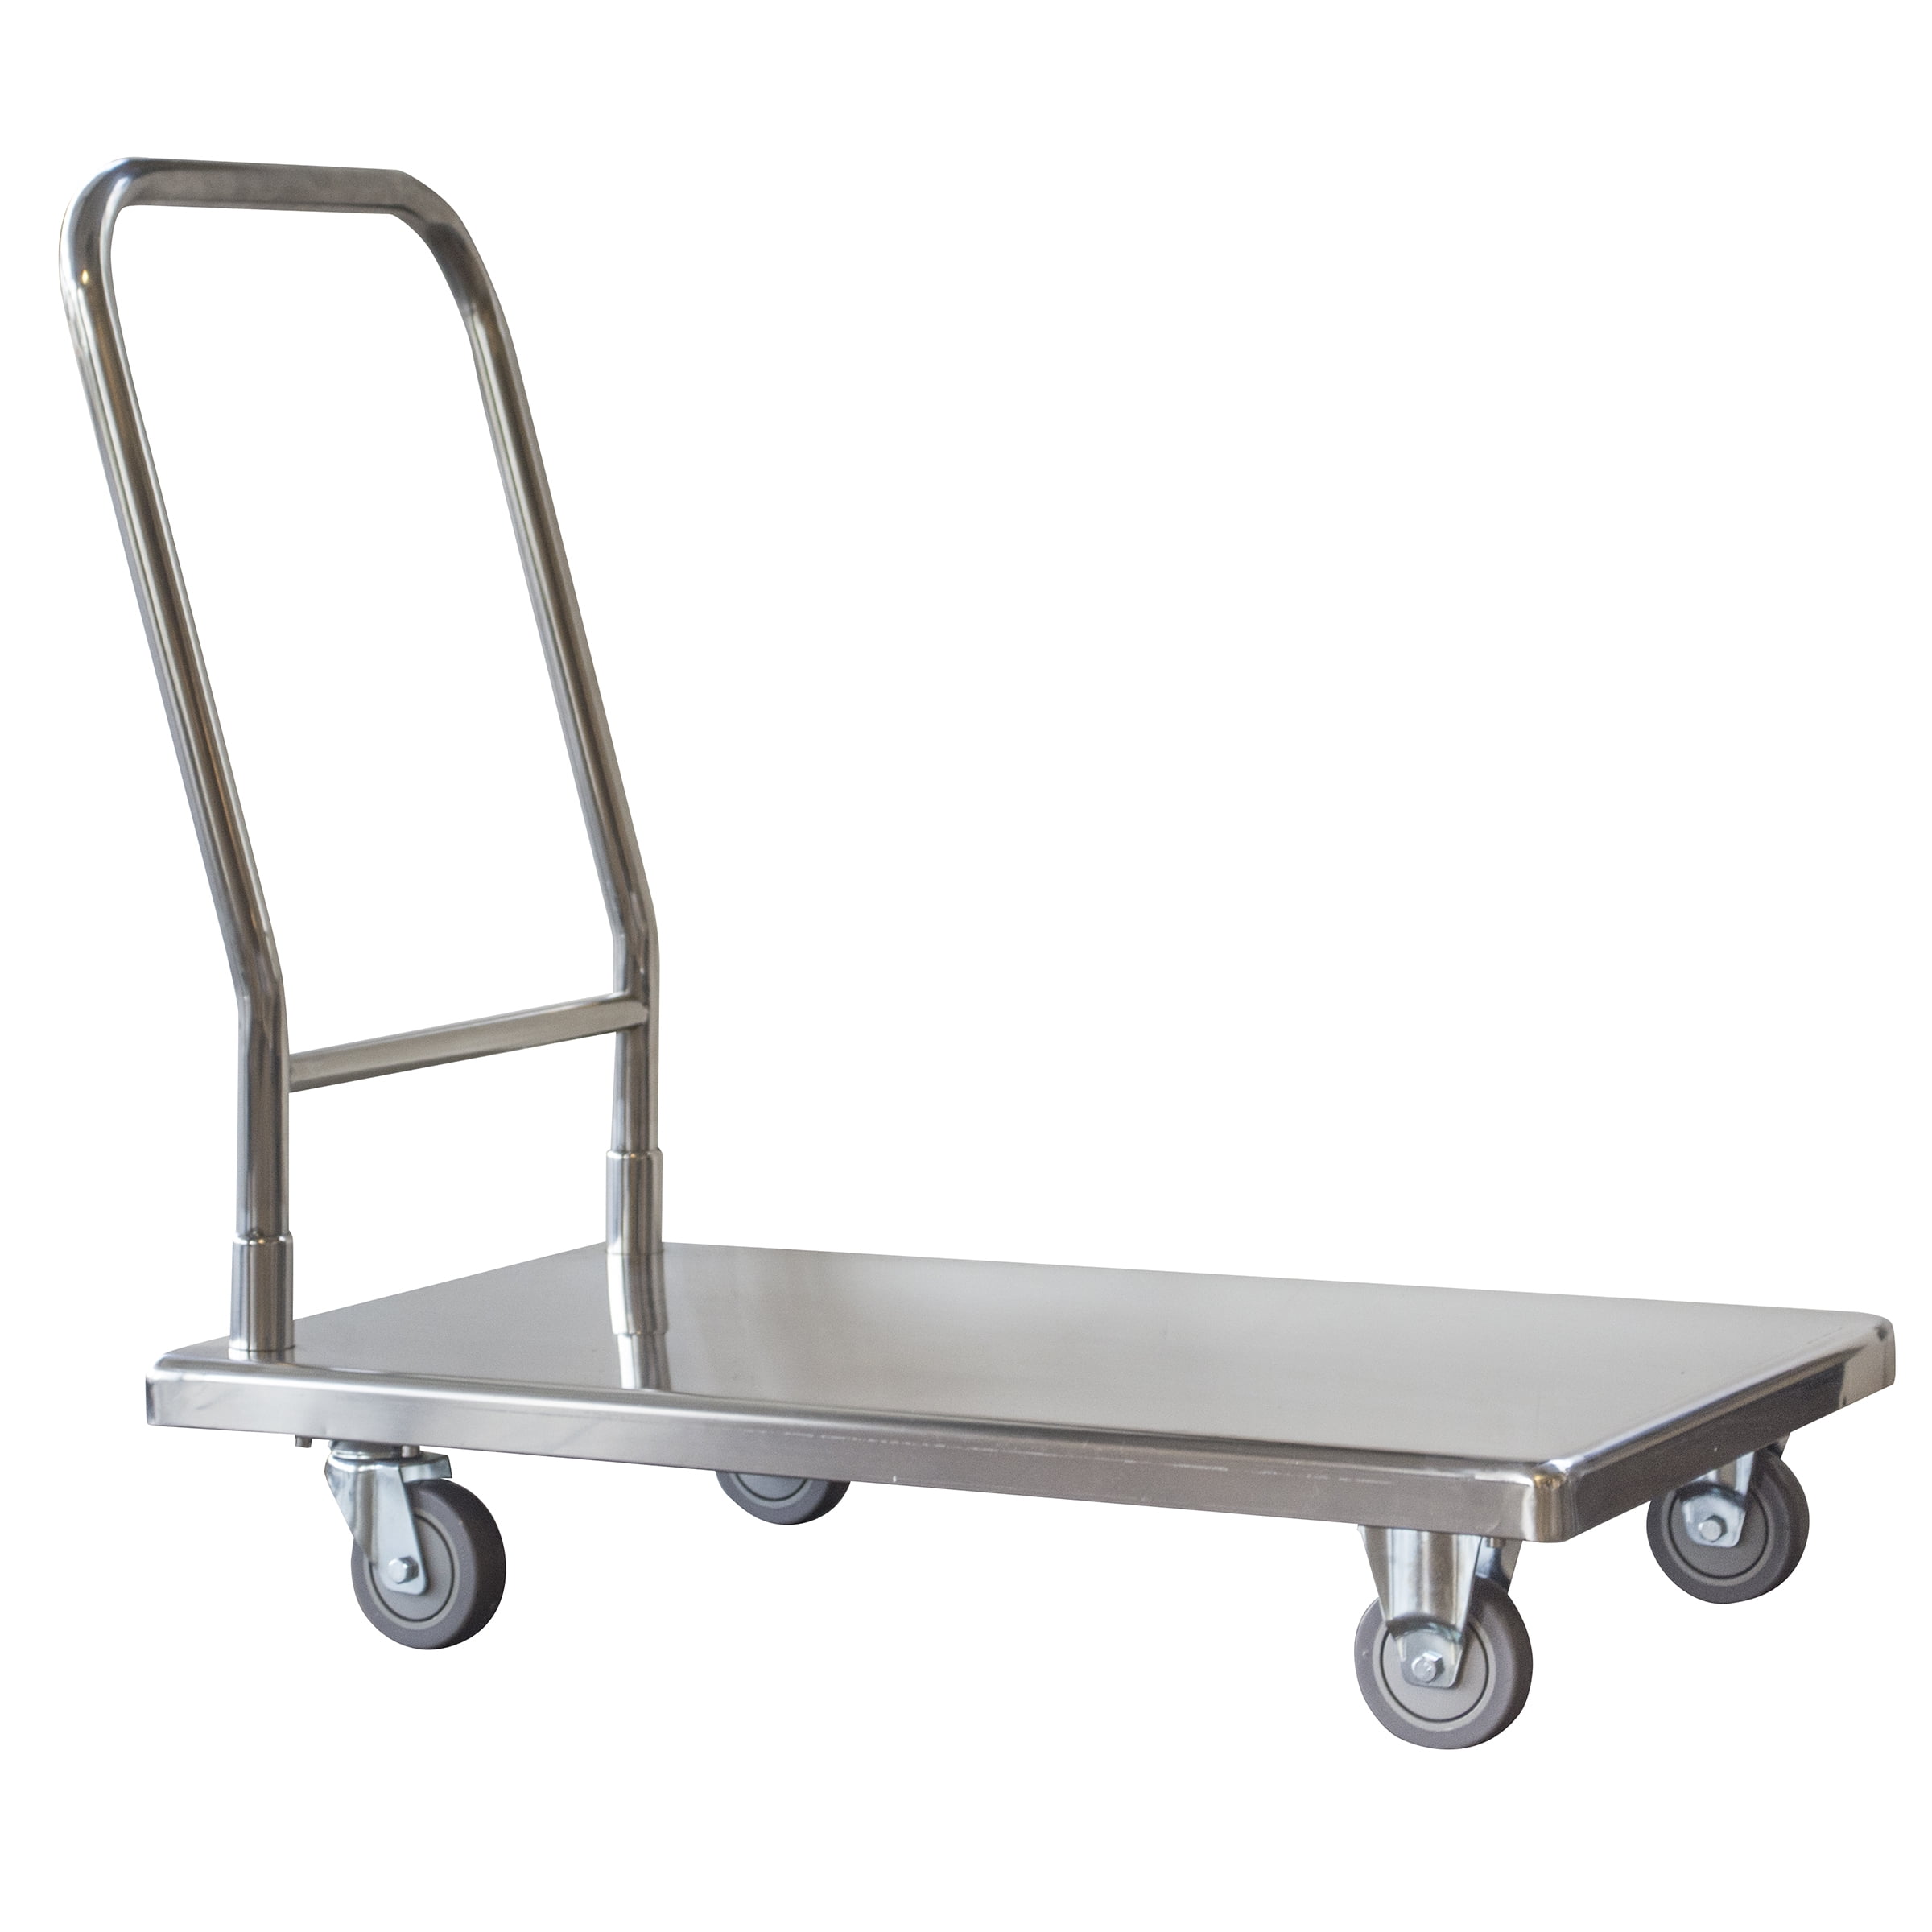 Buffalo Tools Fpt500ss 500 Lbs Stainless Steel Platform Truck, Silver - 33.5 X 21.75 X 35.5 In.